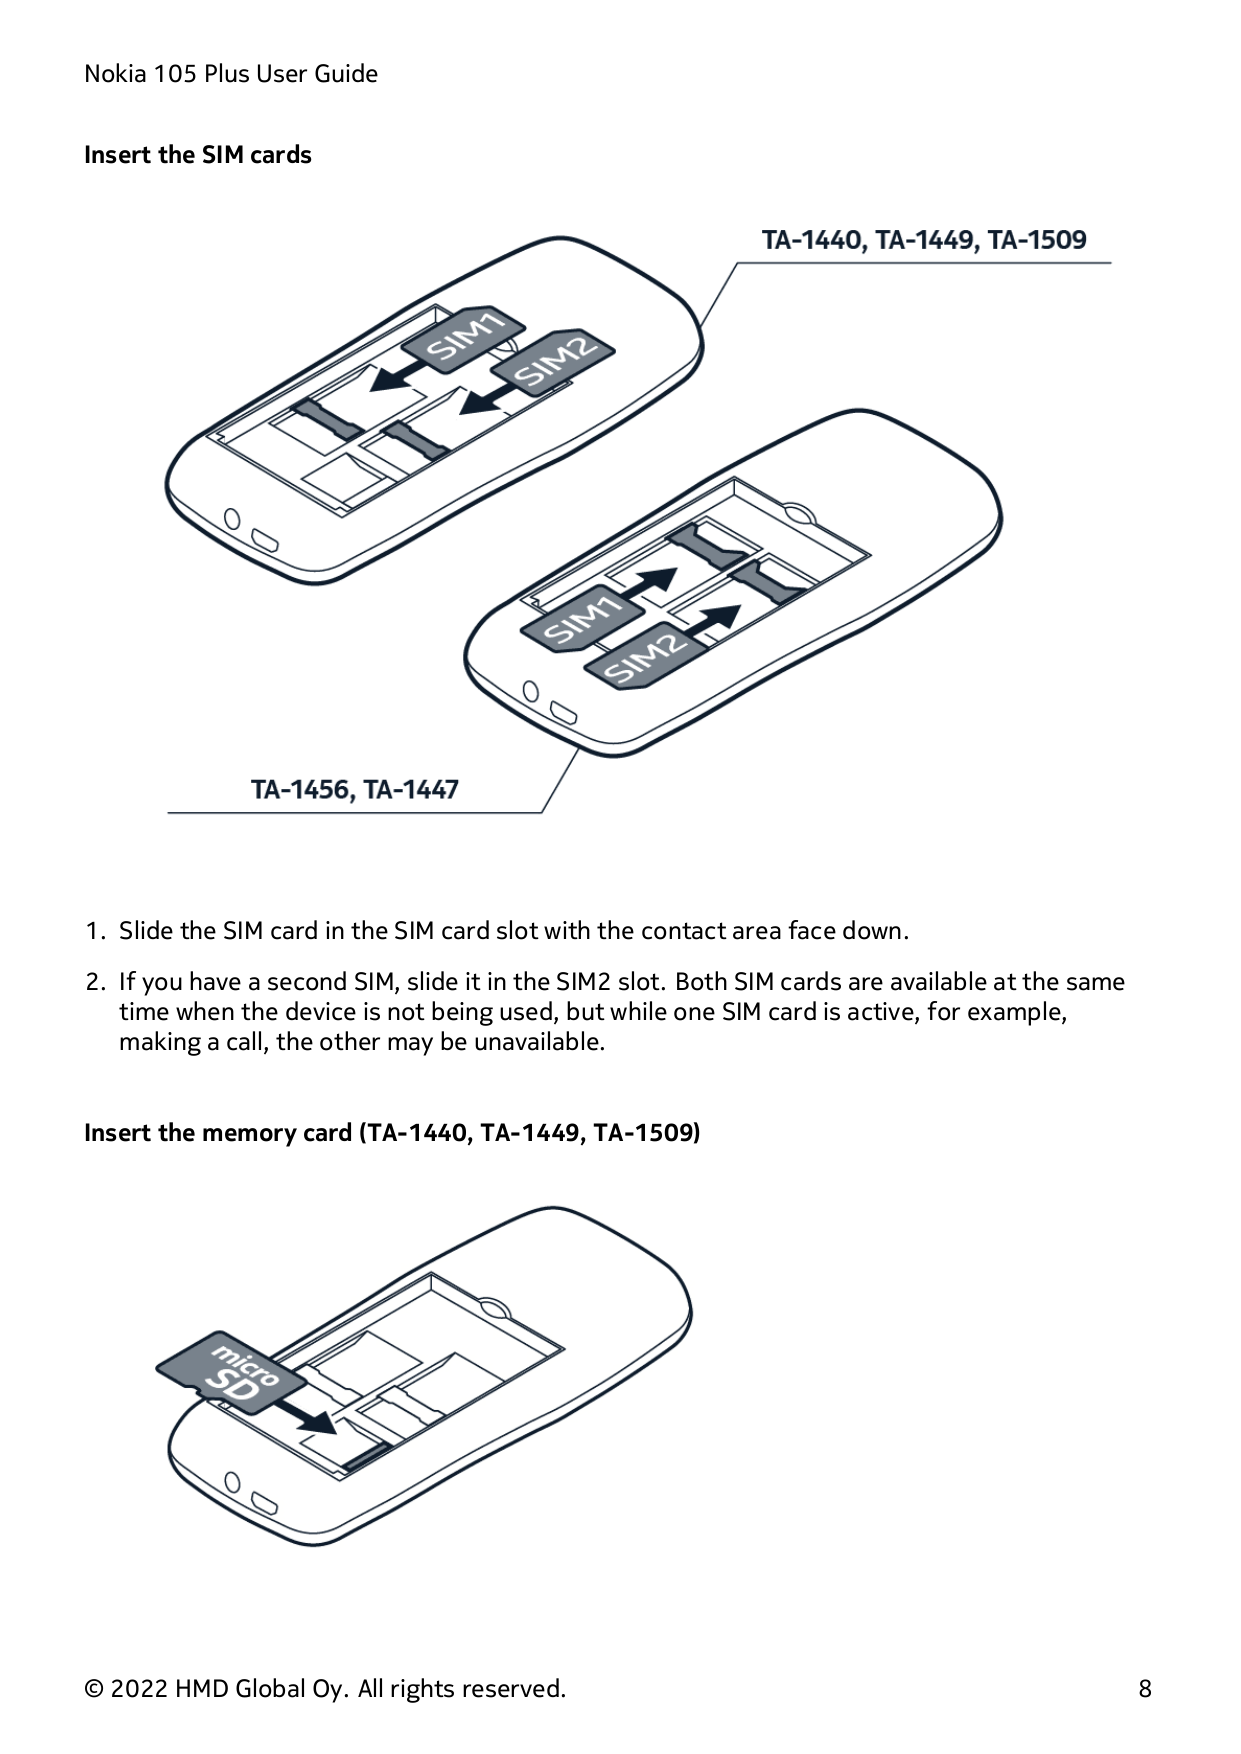 Nokia 105 Plus User GuideInsert the SIM cards1. Slide the SIM card in the SIM card slot with the contact area face down.2. If yo